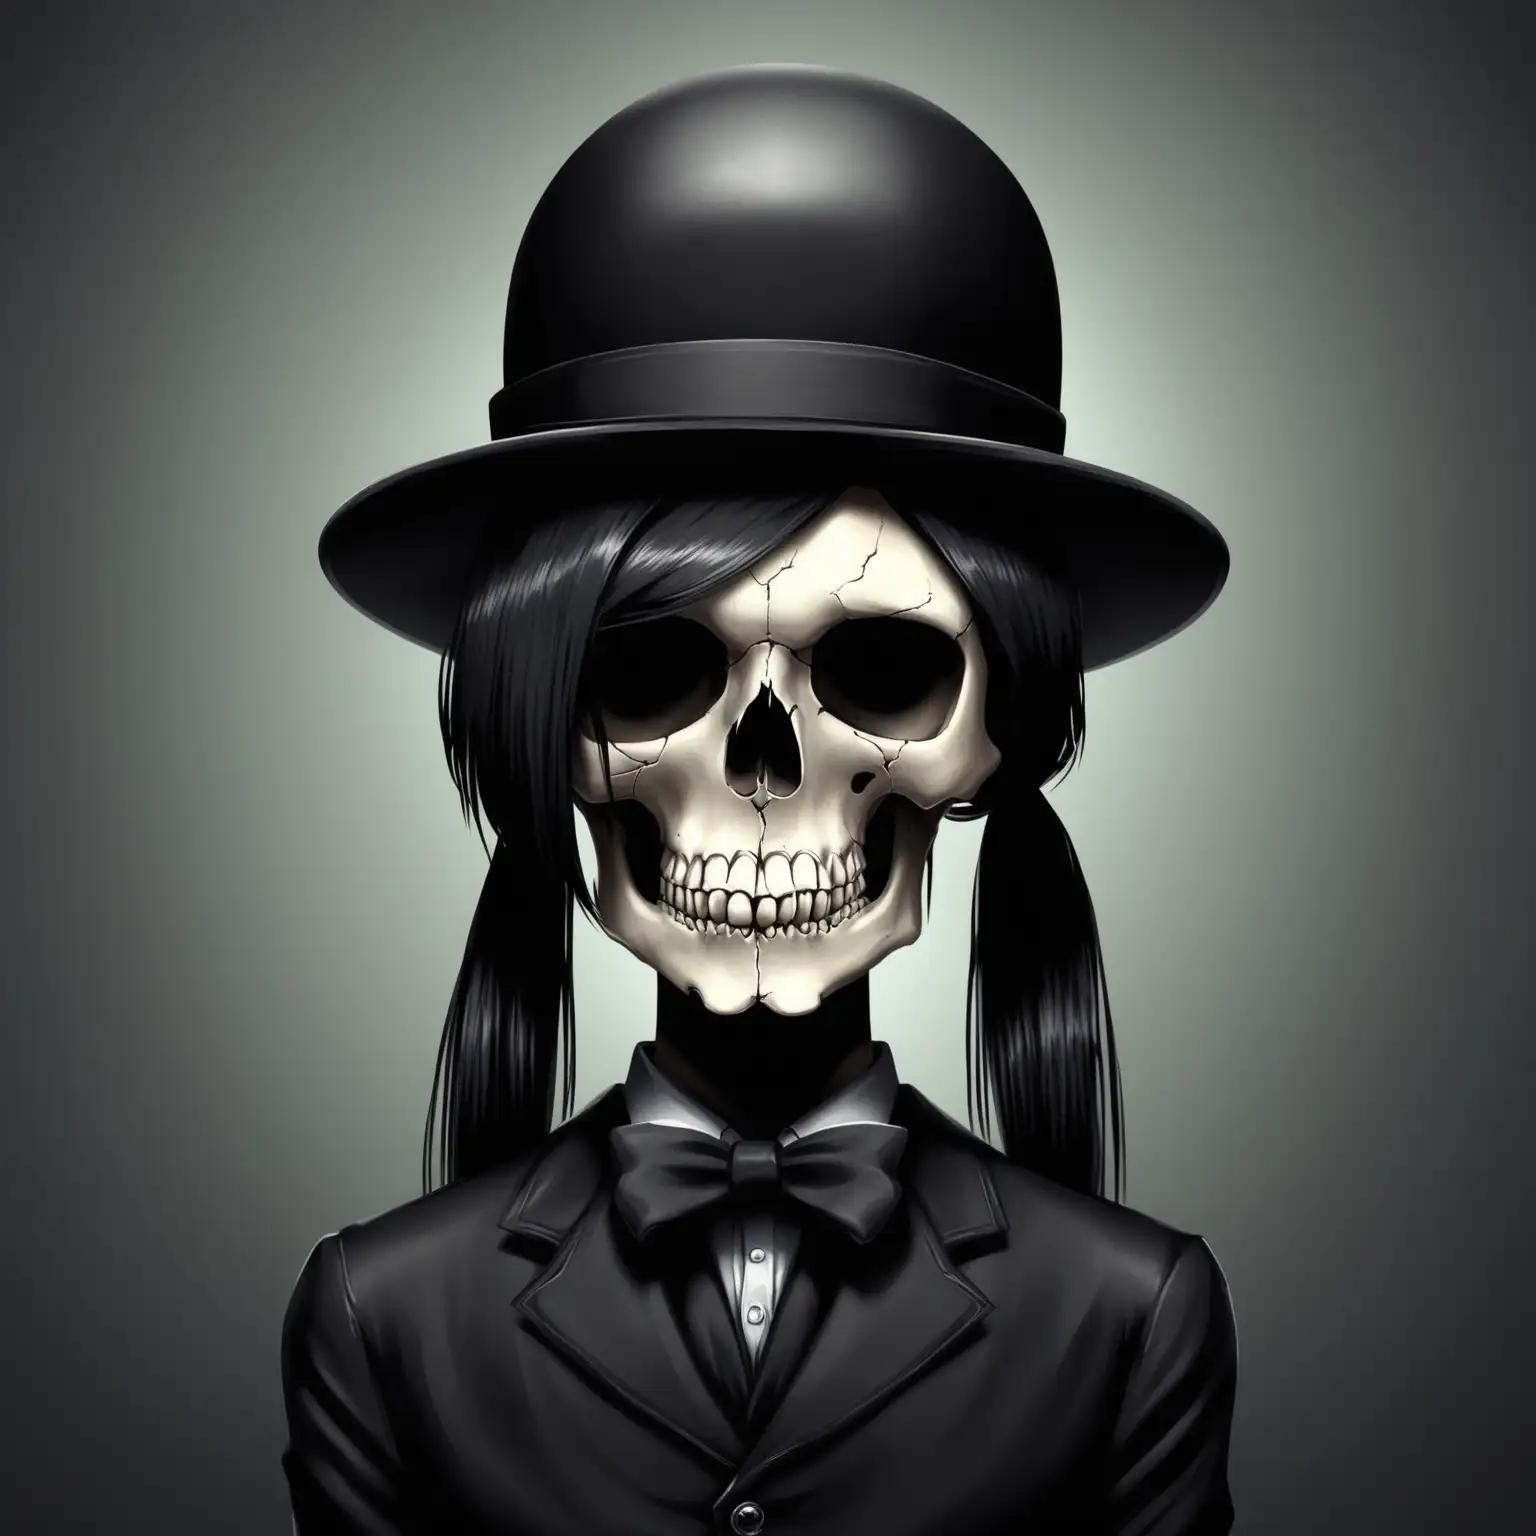 Skull Head with Black Hair in Ponytails and Bowler Hat